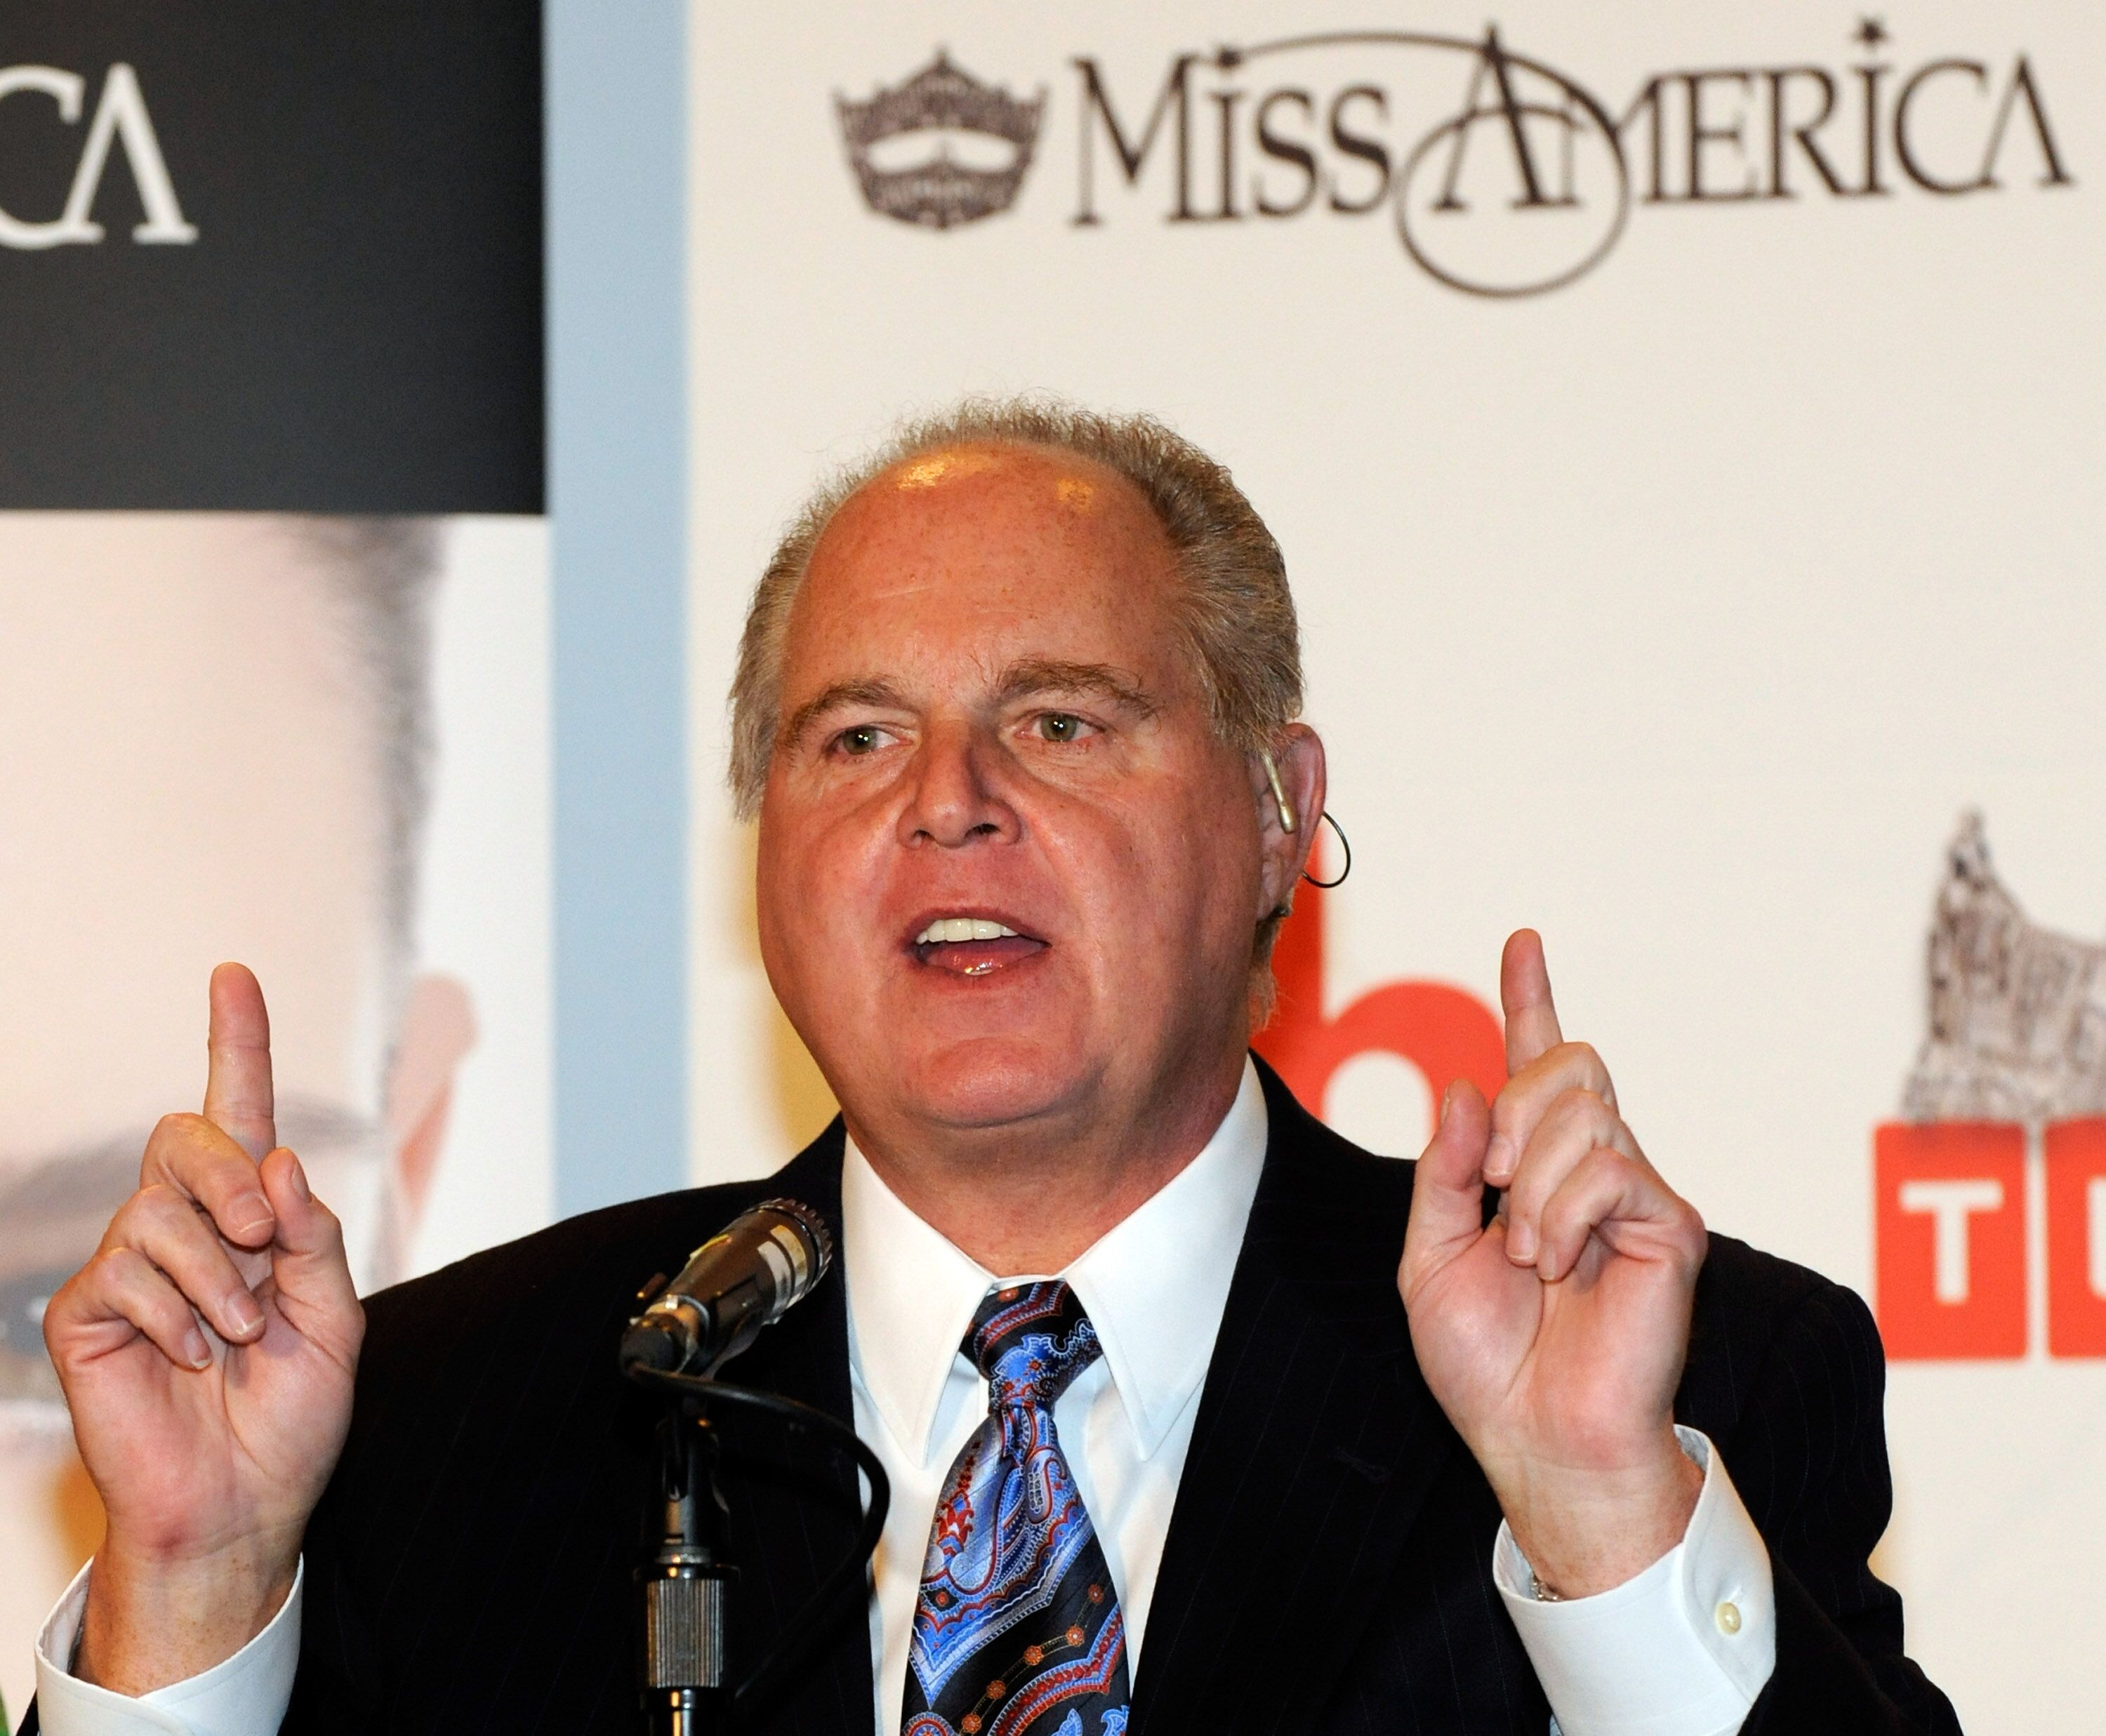 Radio talk show host and conservative commentator Rush Limbaugh, one of the judges for the 2010 Miss America Pageant, speaks during a news conference for judges at the Planet Hollywood Resort & Casino January 27, 2010 in Las Vegas, Nevada. | Photo: Getty Images